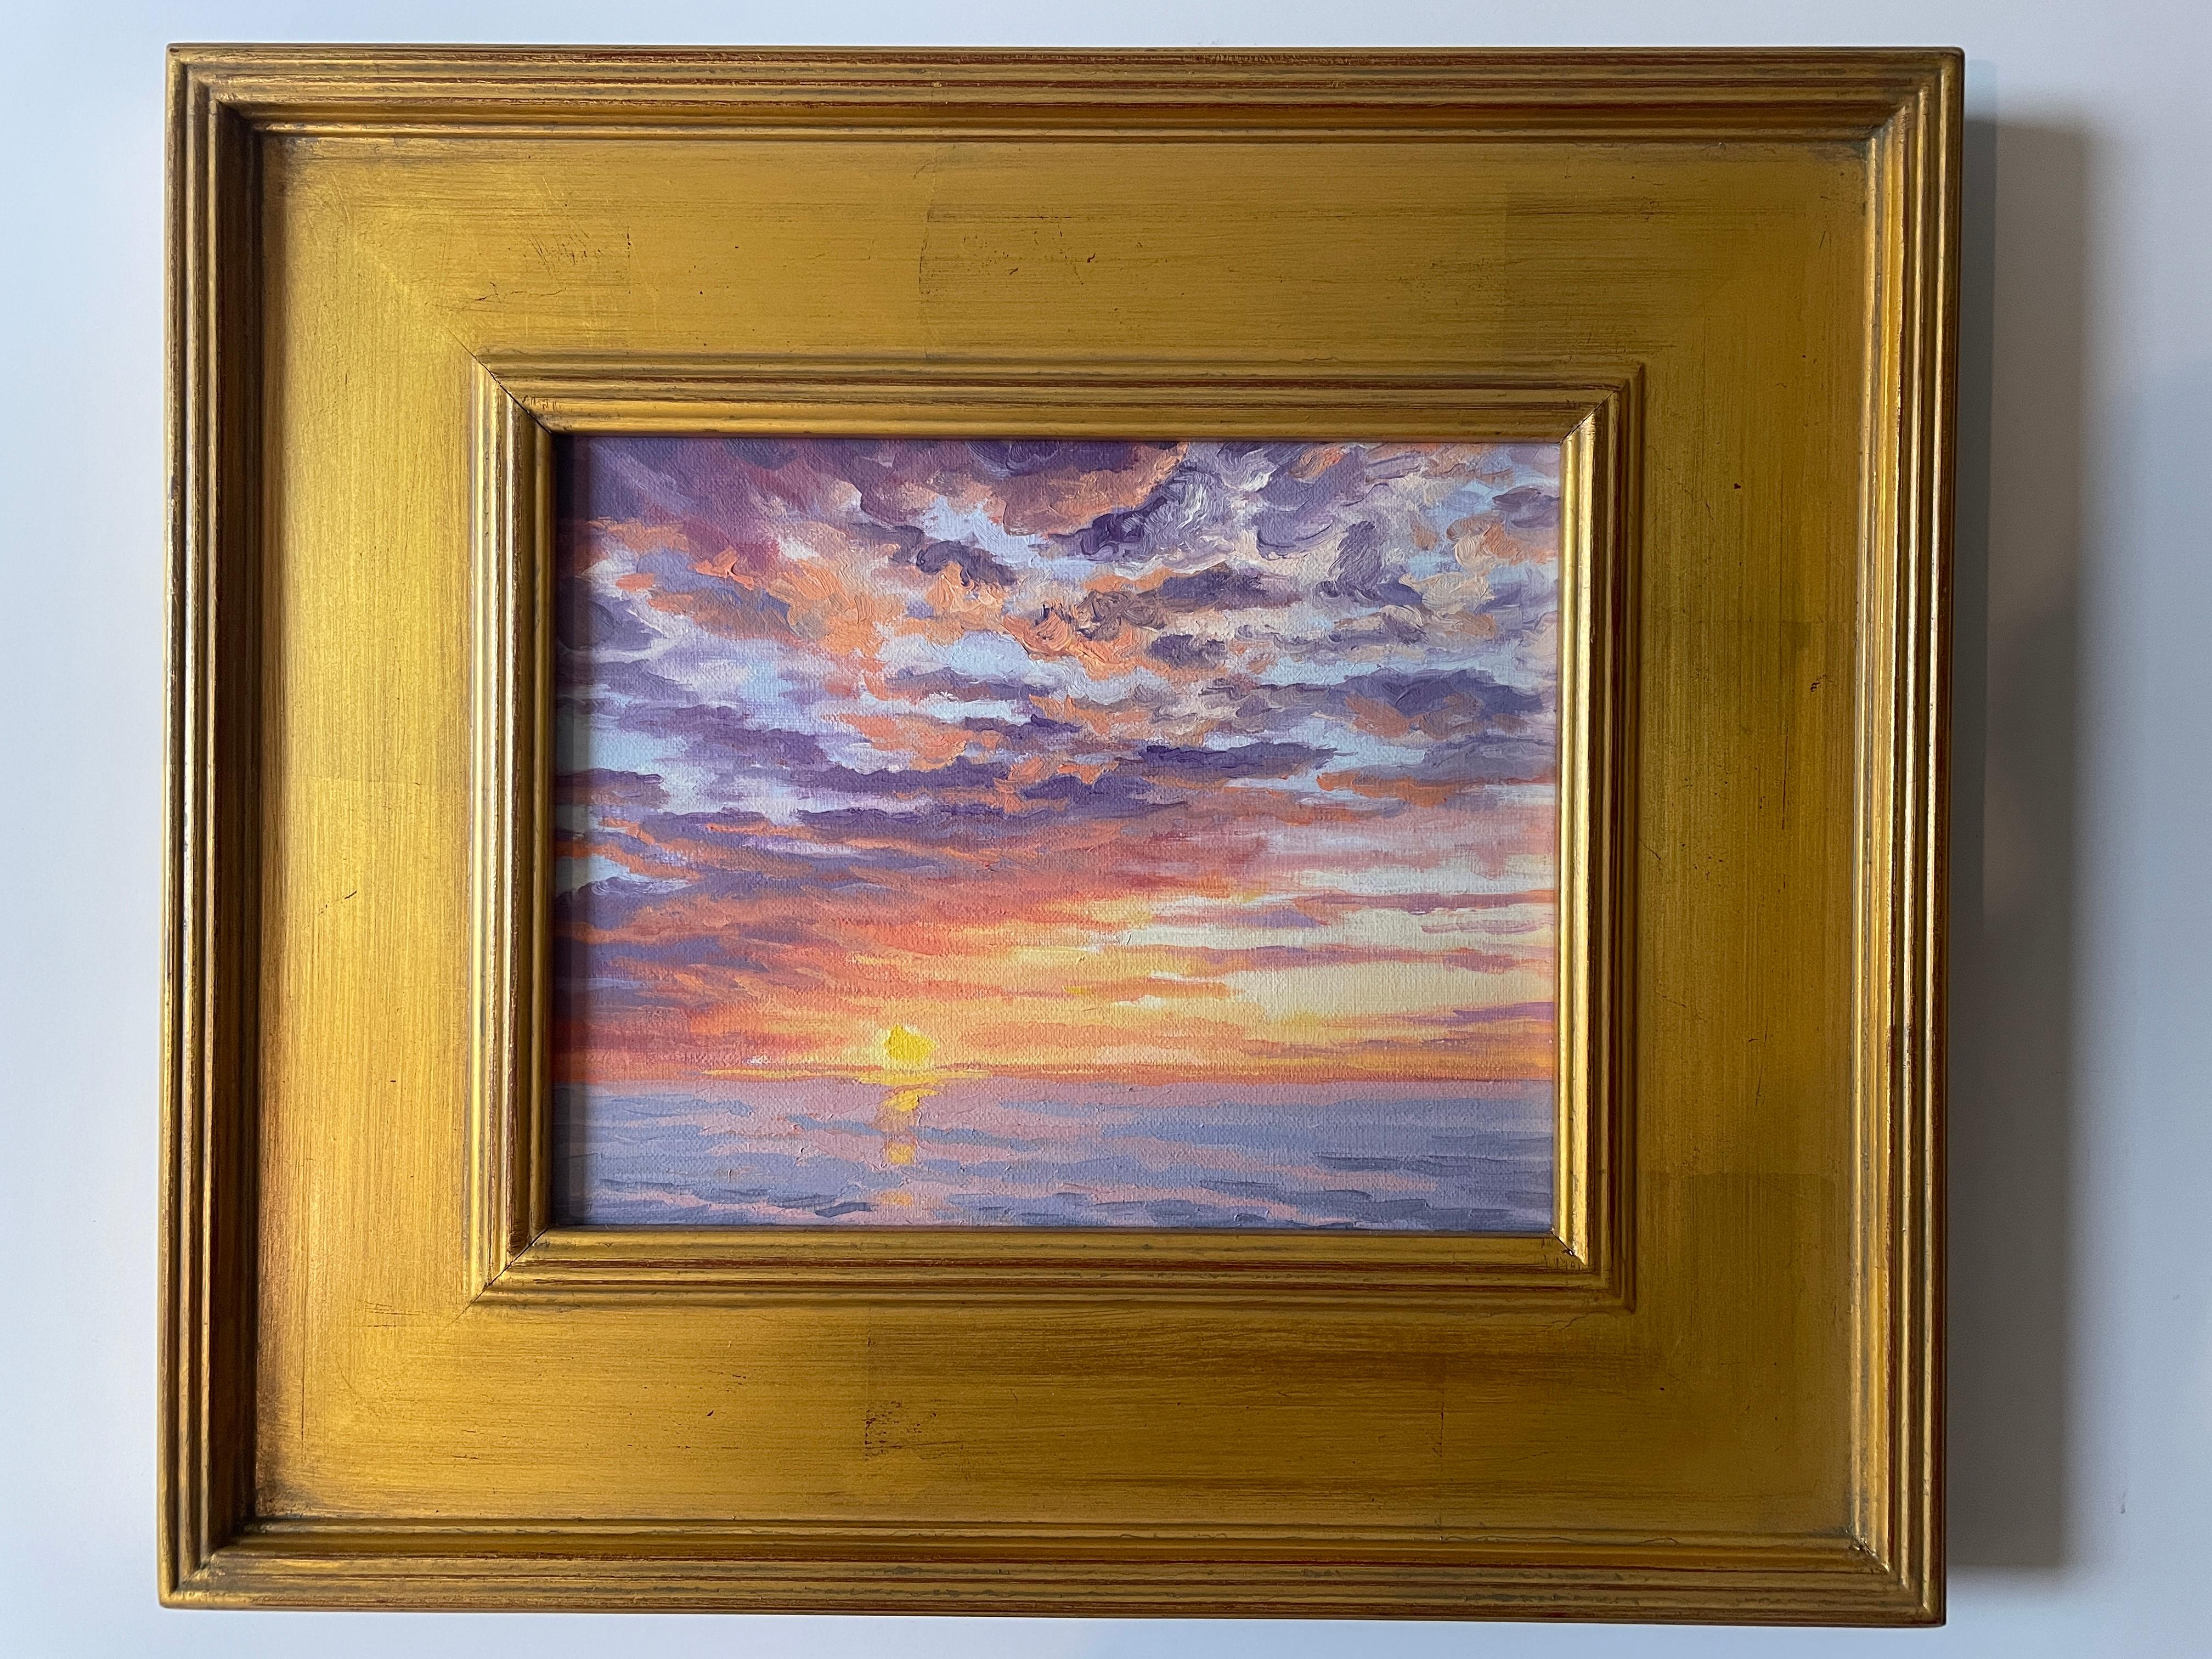 As the Sun Drops Below the Horizon. Title - Last Light of Day - Brown Landscape Painting by Carl Scorza